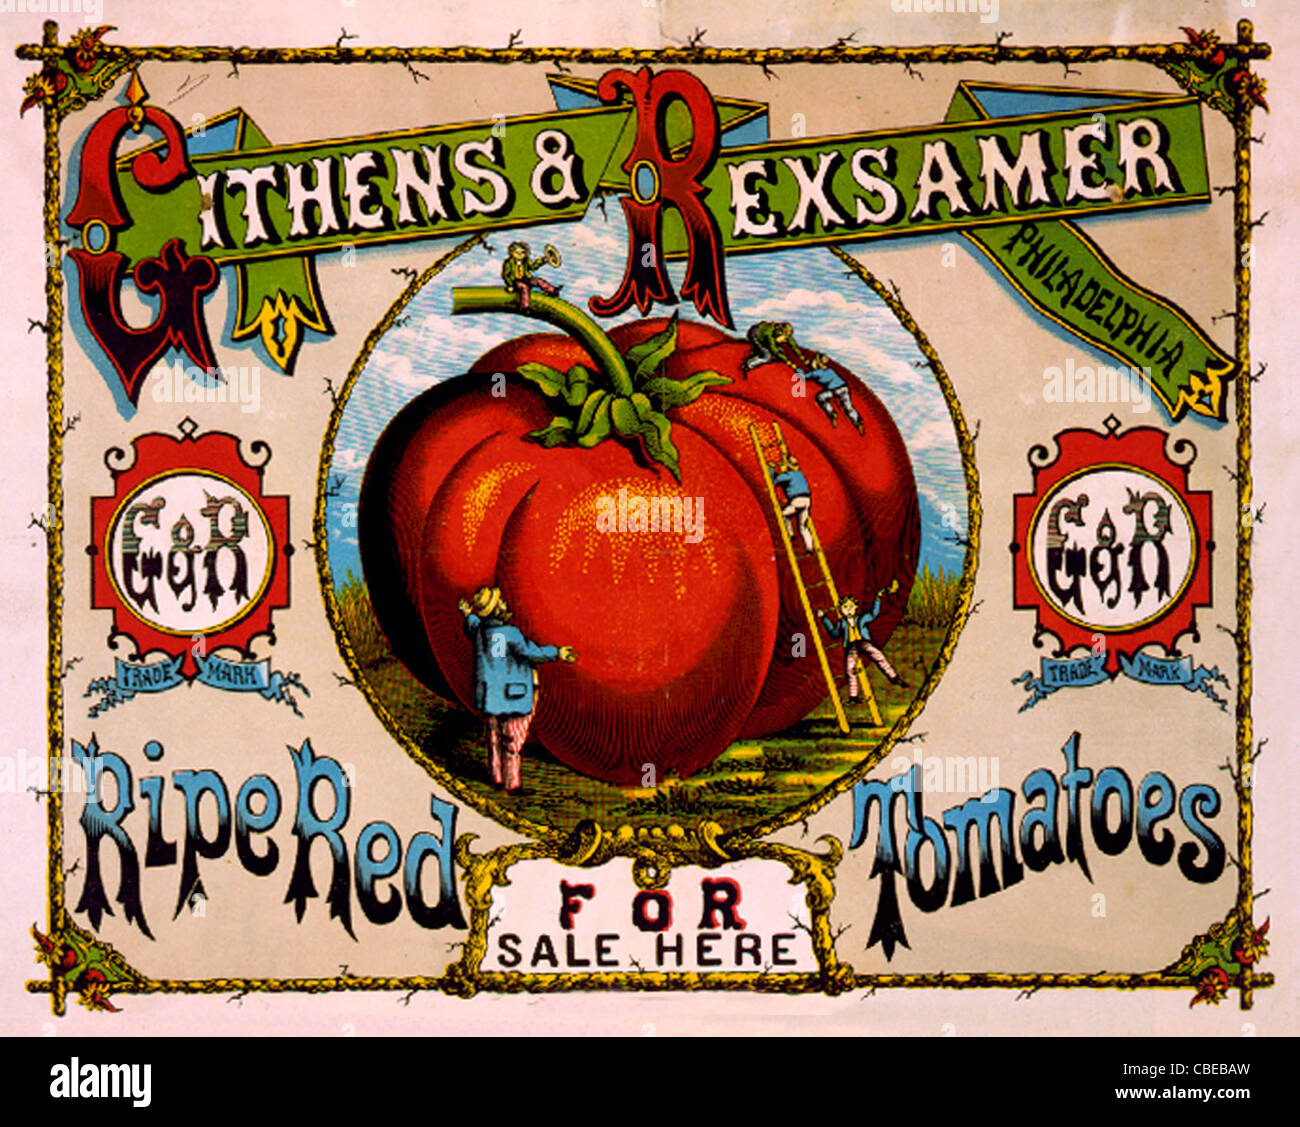 Ripe red tomatoes for sale here Advertisement for Githens & Rexsamer tomatoes showing men climbing gigantic tomato. Stock Photo